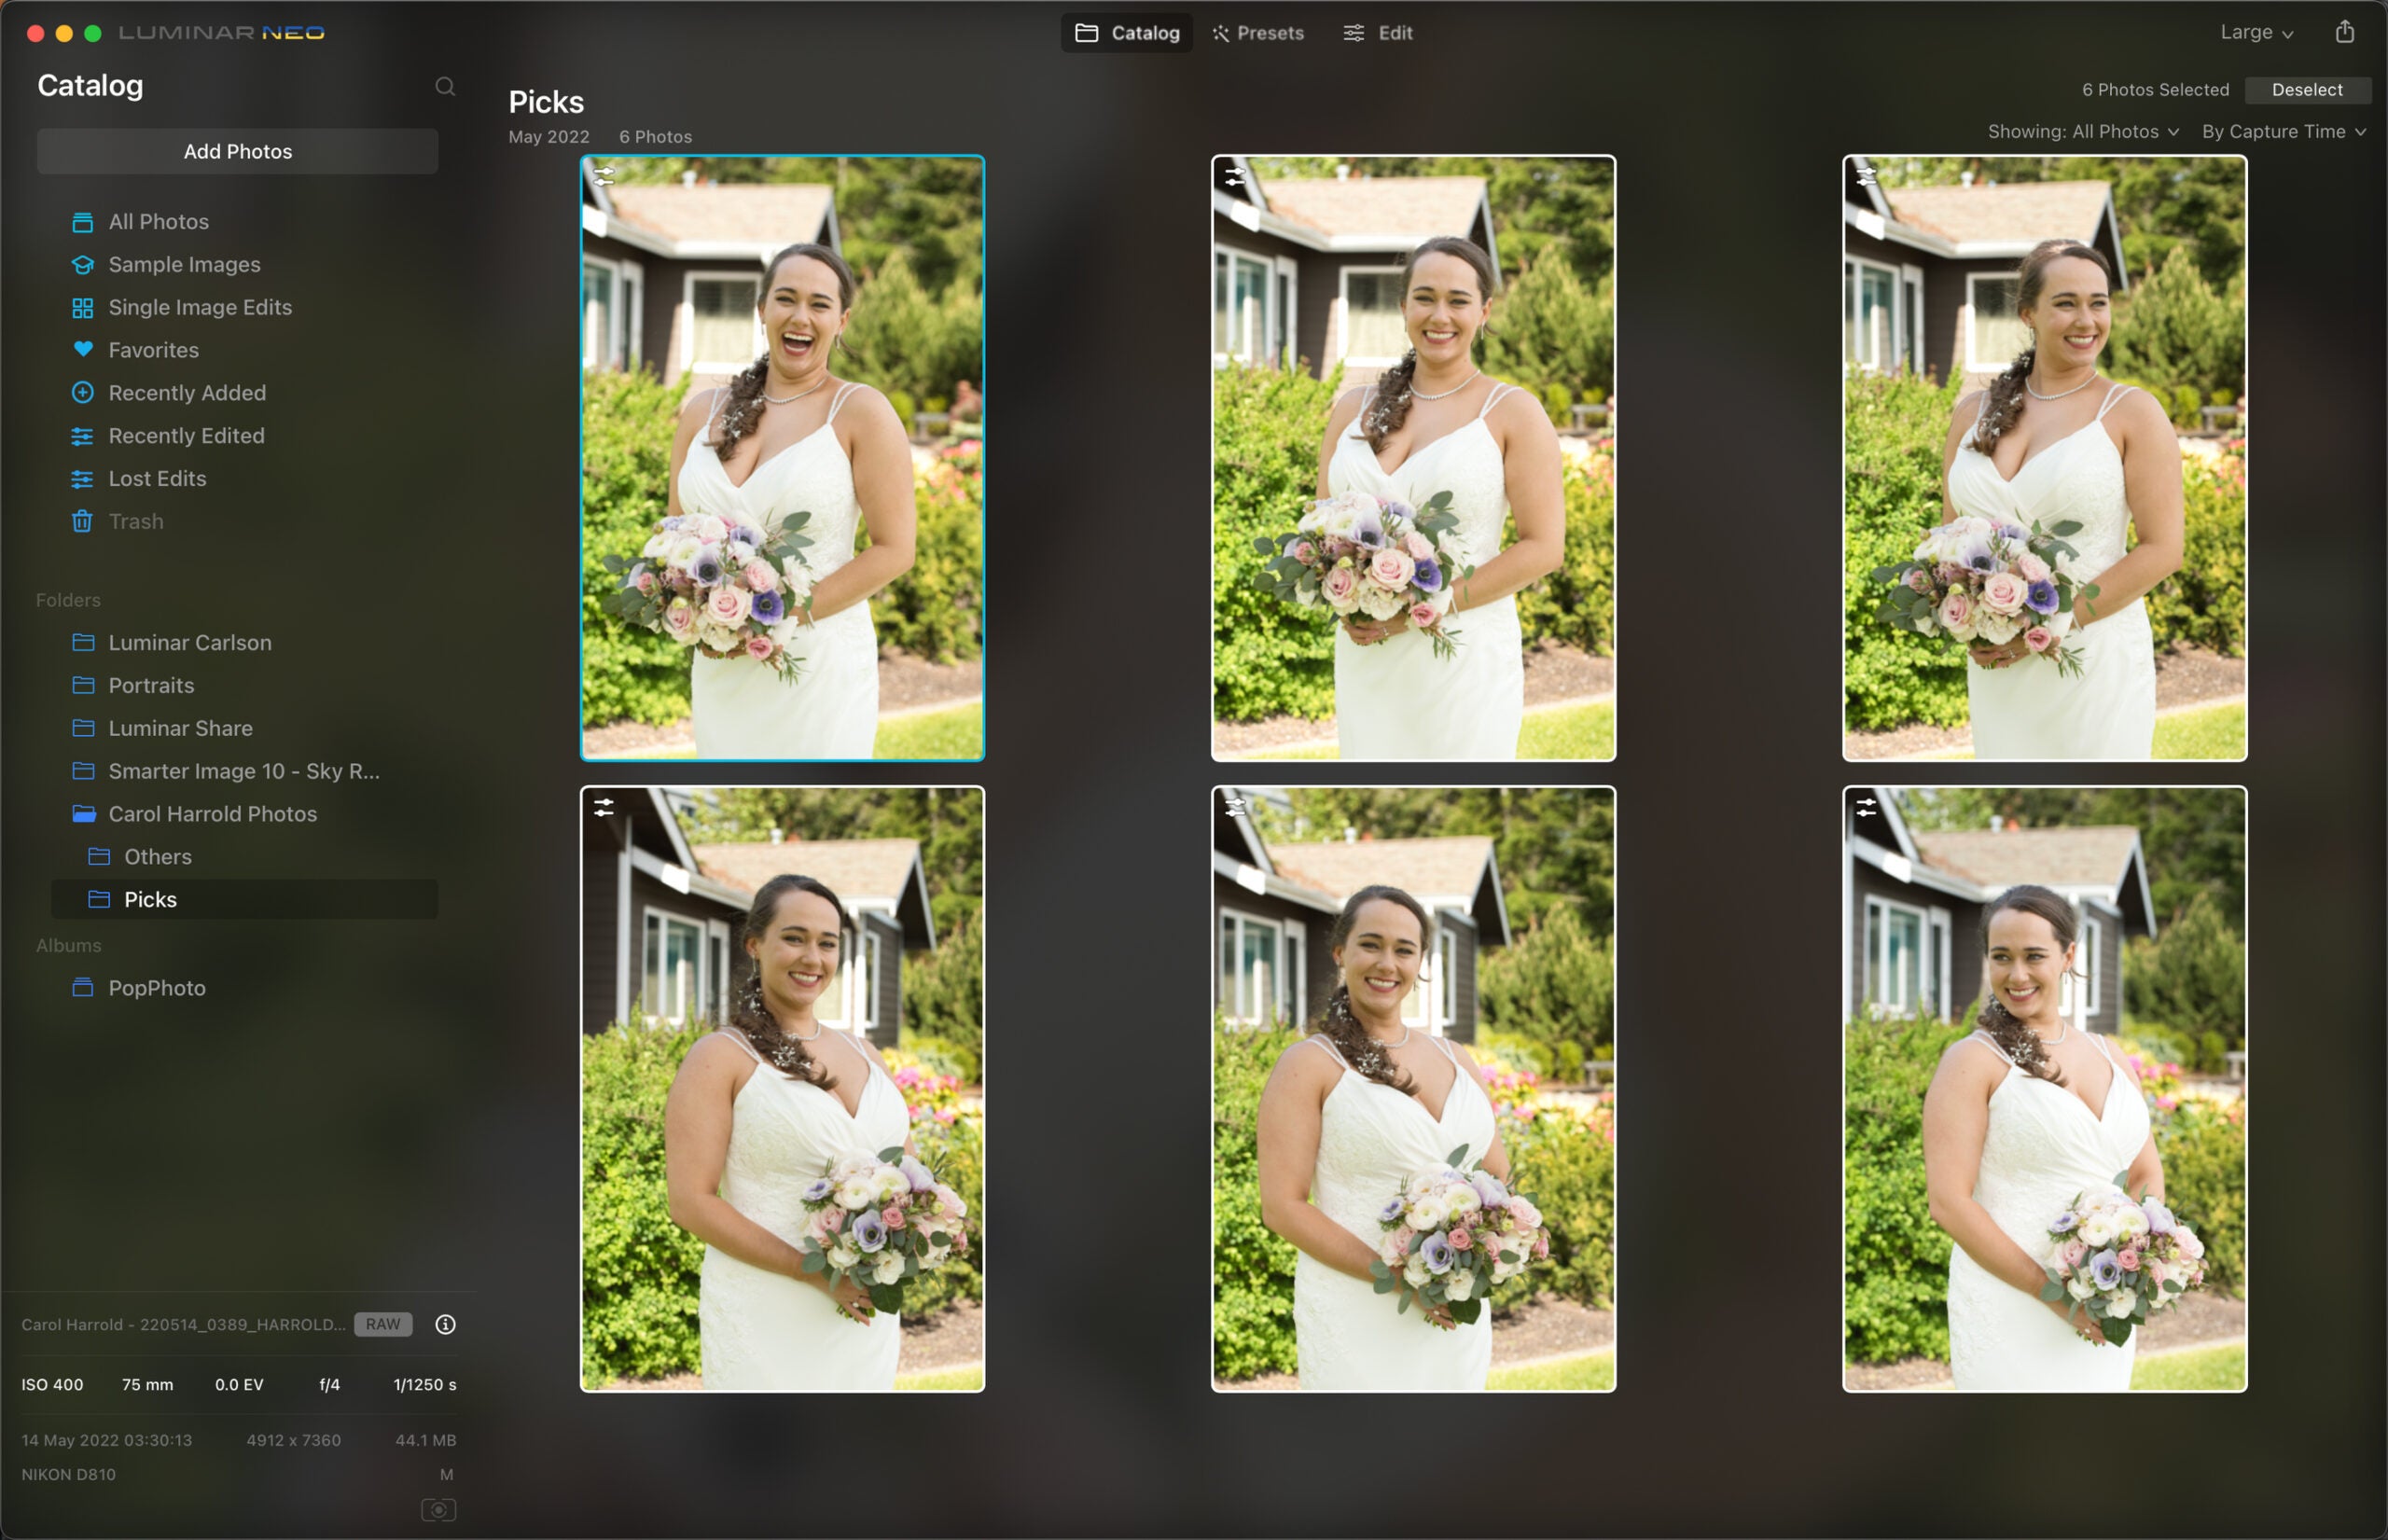 After syncing, the image series now features the lightened bride.